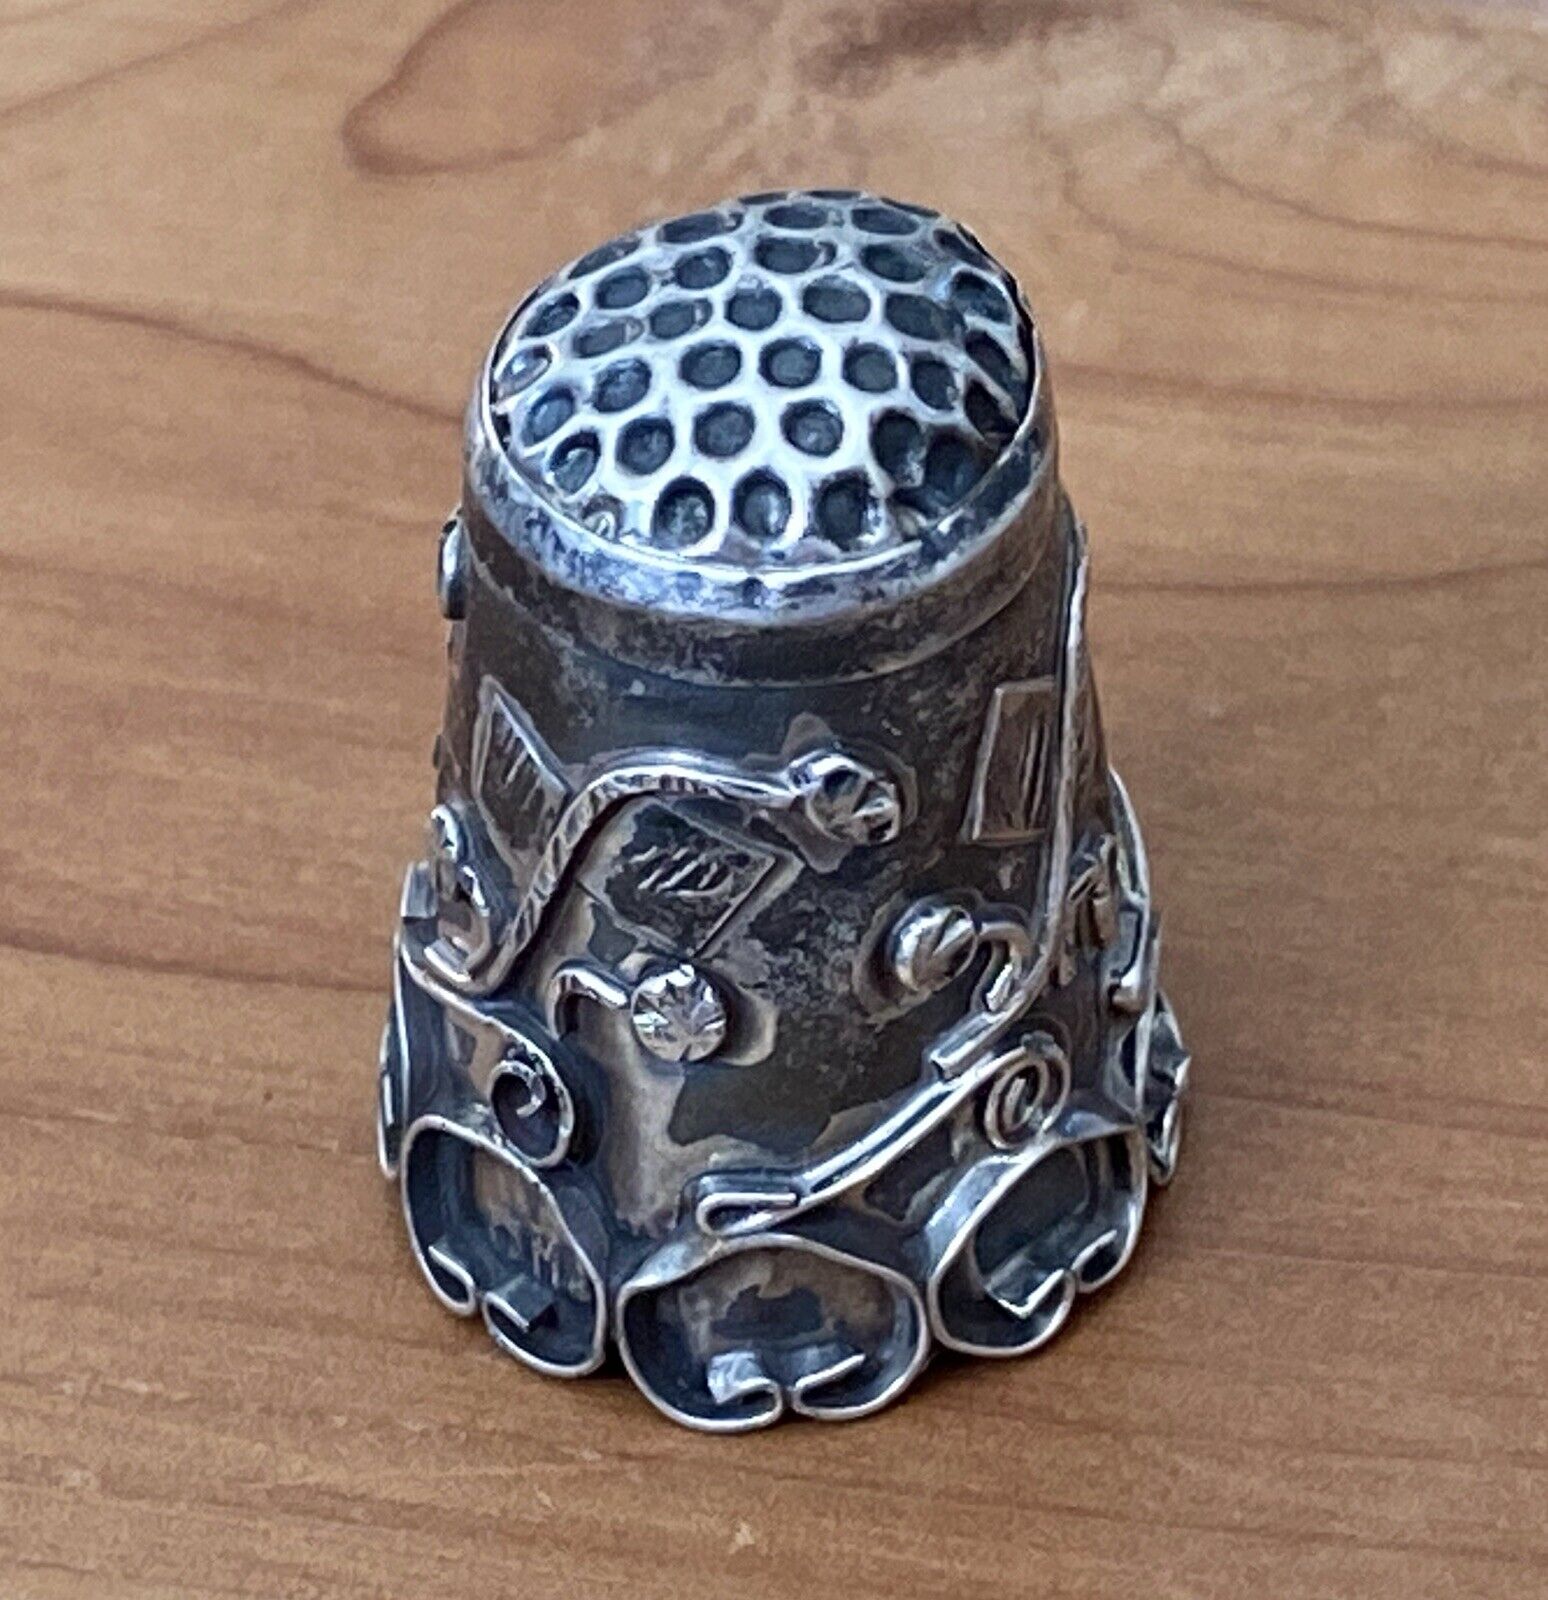 ANTIQUE TAXCO MEXICO 925 STERLING SILVER ORNATE SWIRL & FLOWERS, LEAFS THIMBLE